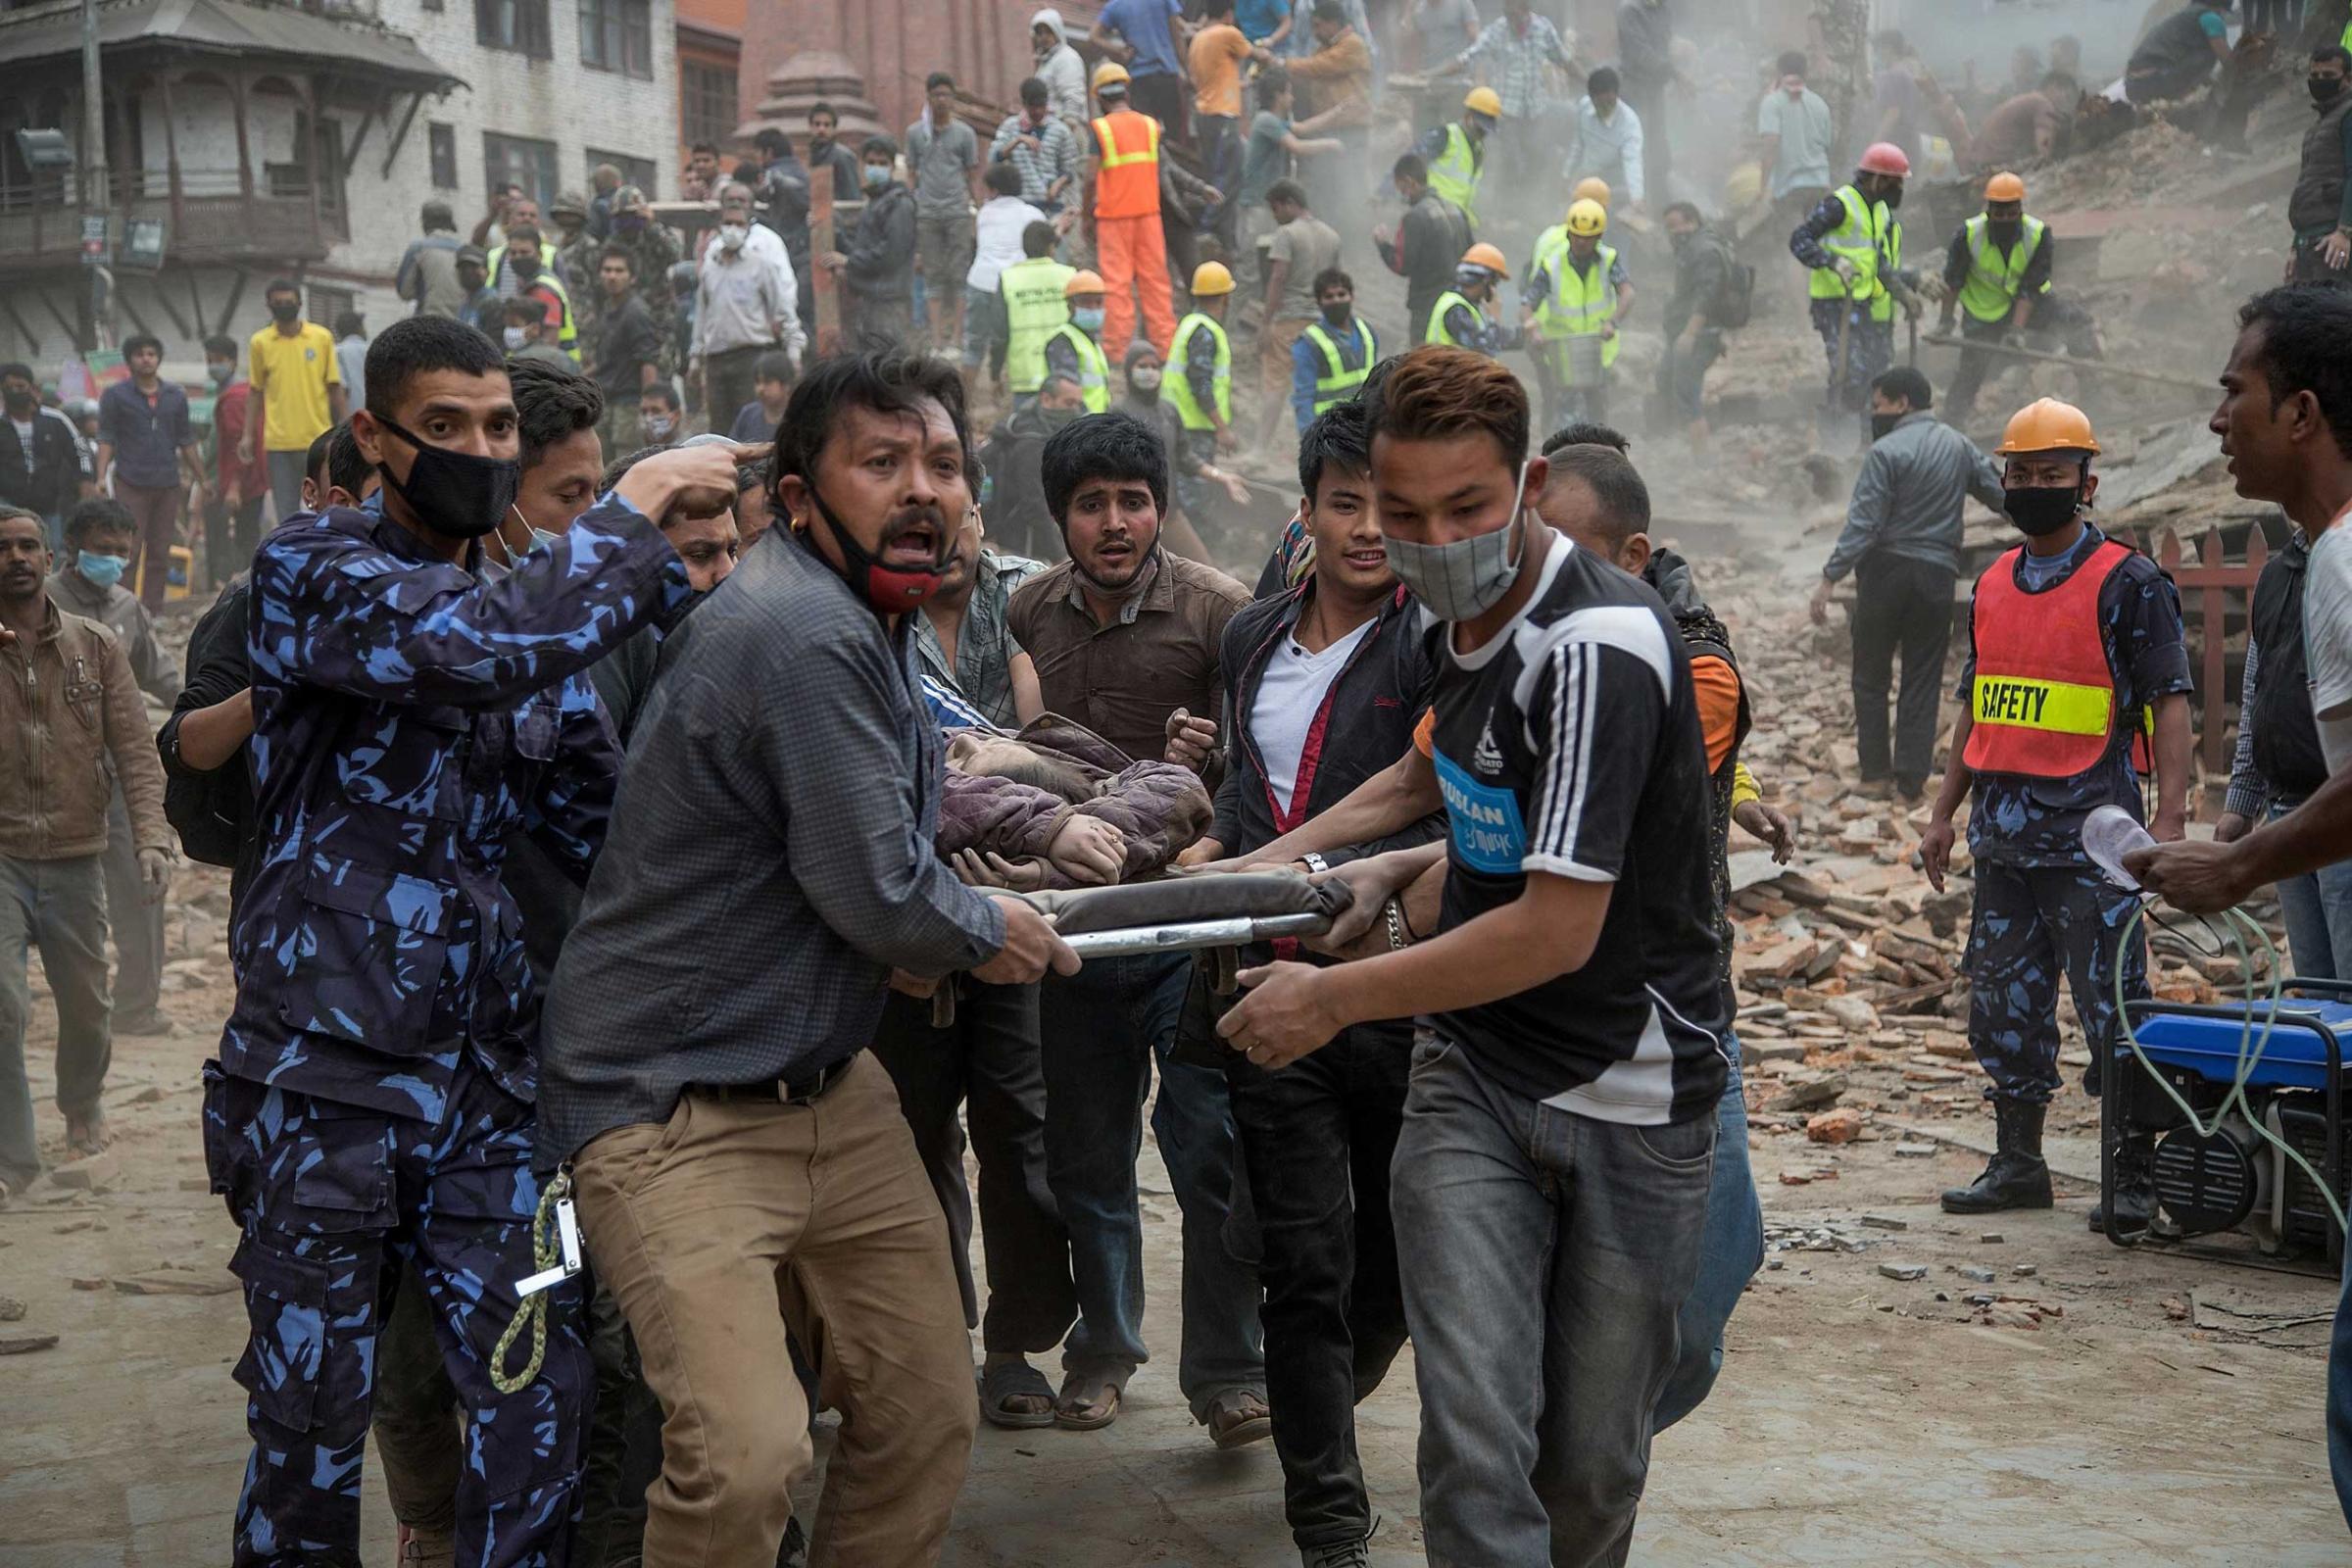 Emergency rescue workers carry a victim on a stretcher after Dharara tower collapsed in Kathmandu, Nepal on April 25, 2015